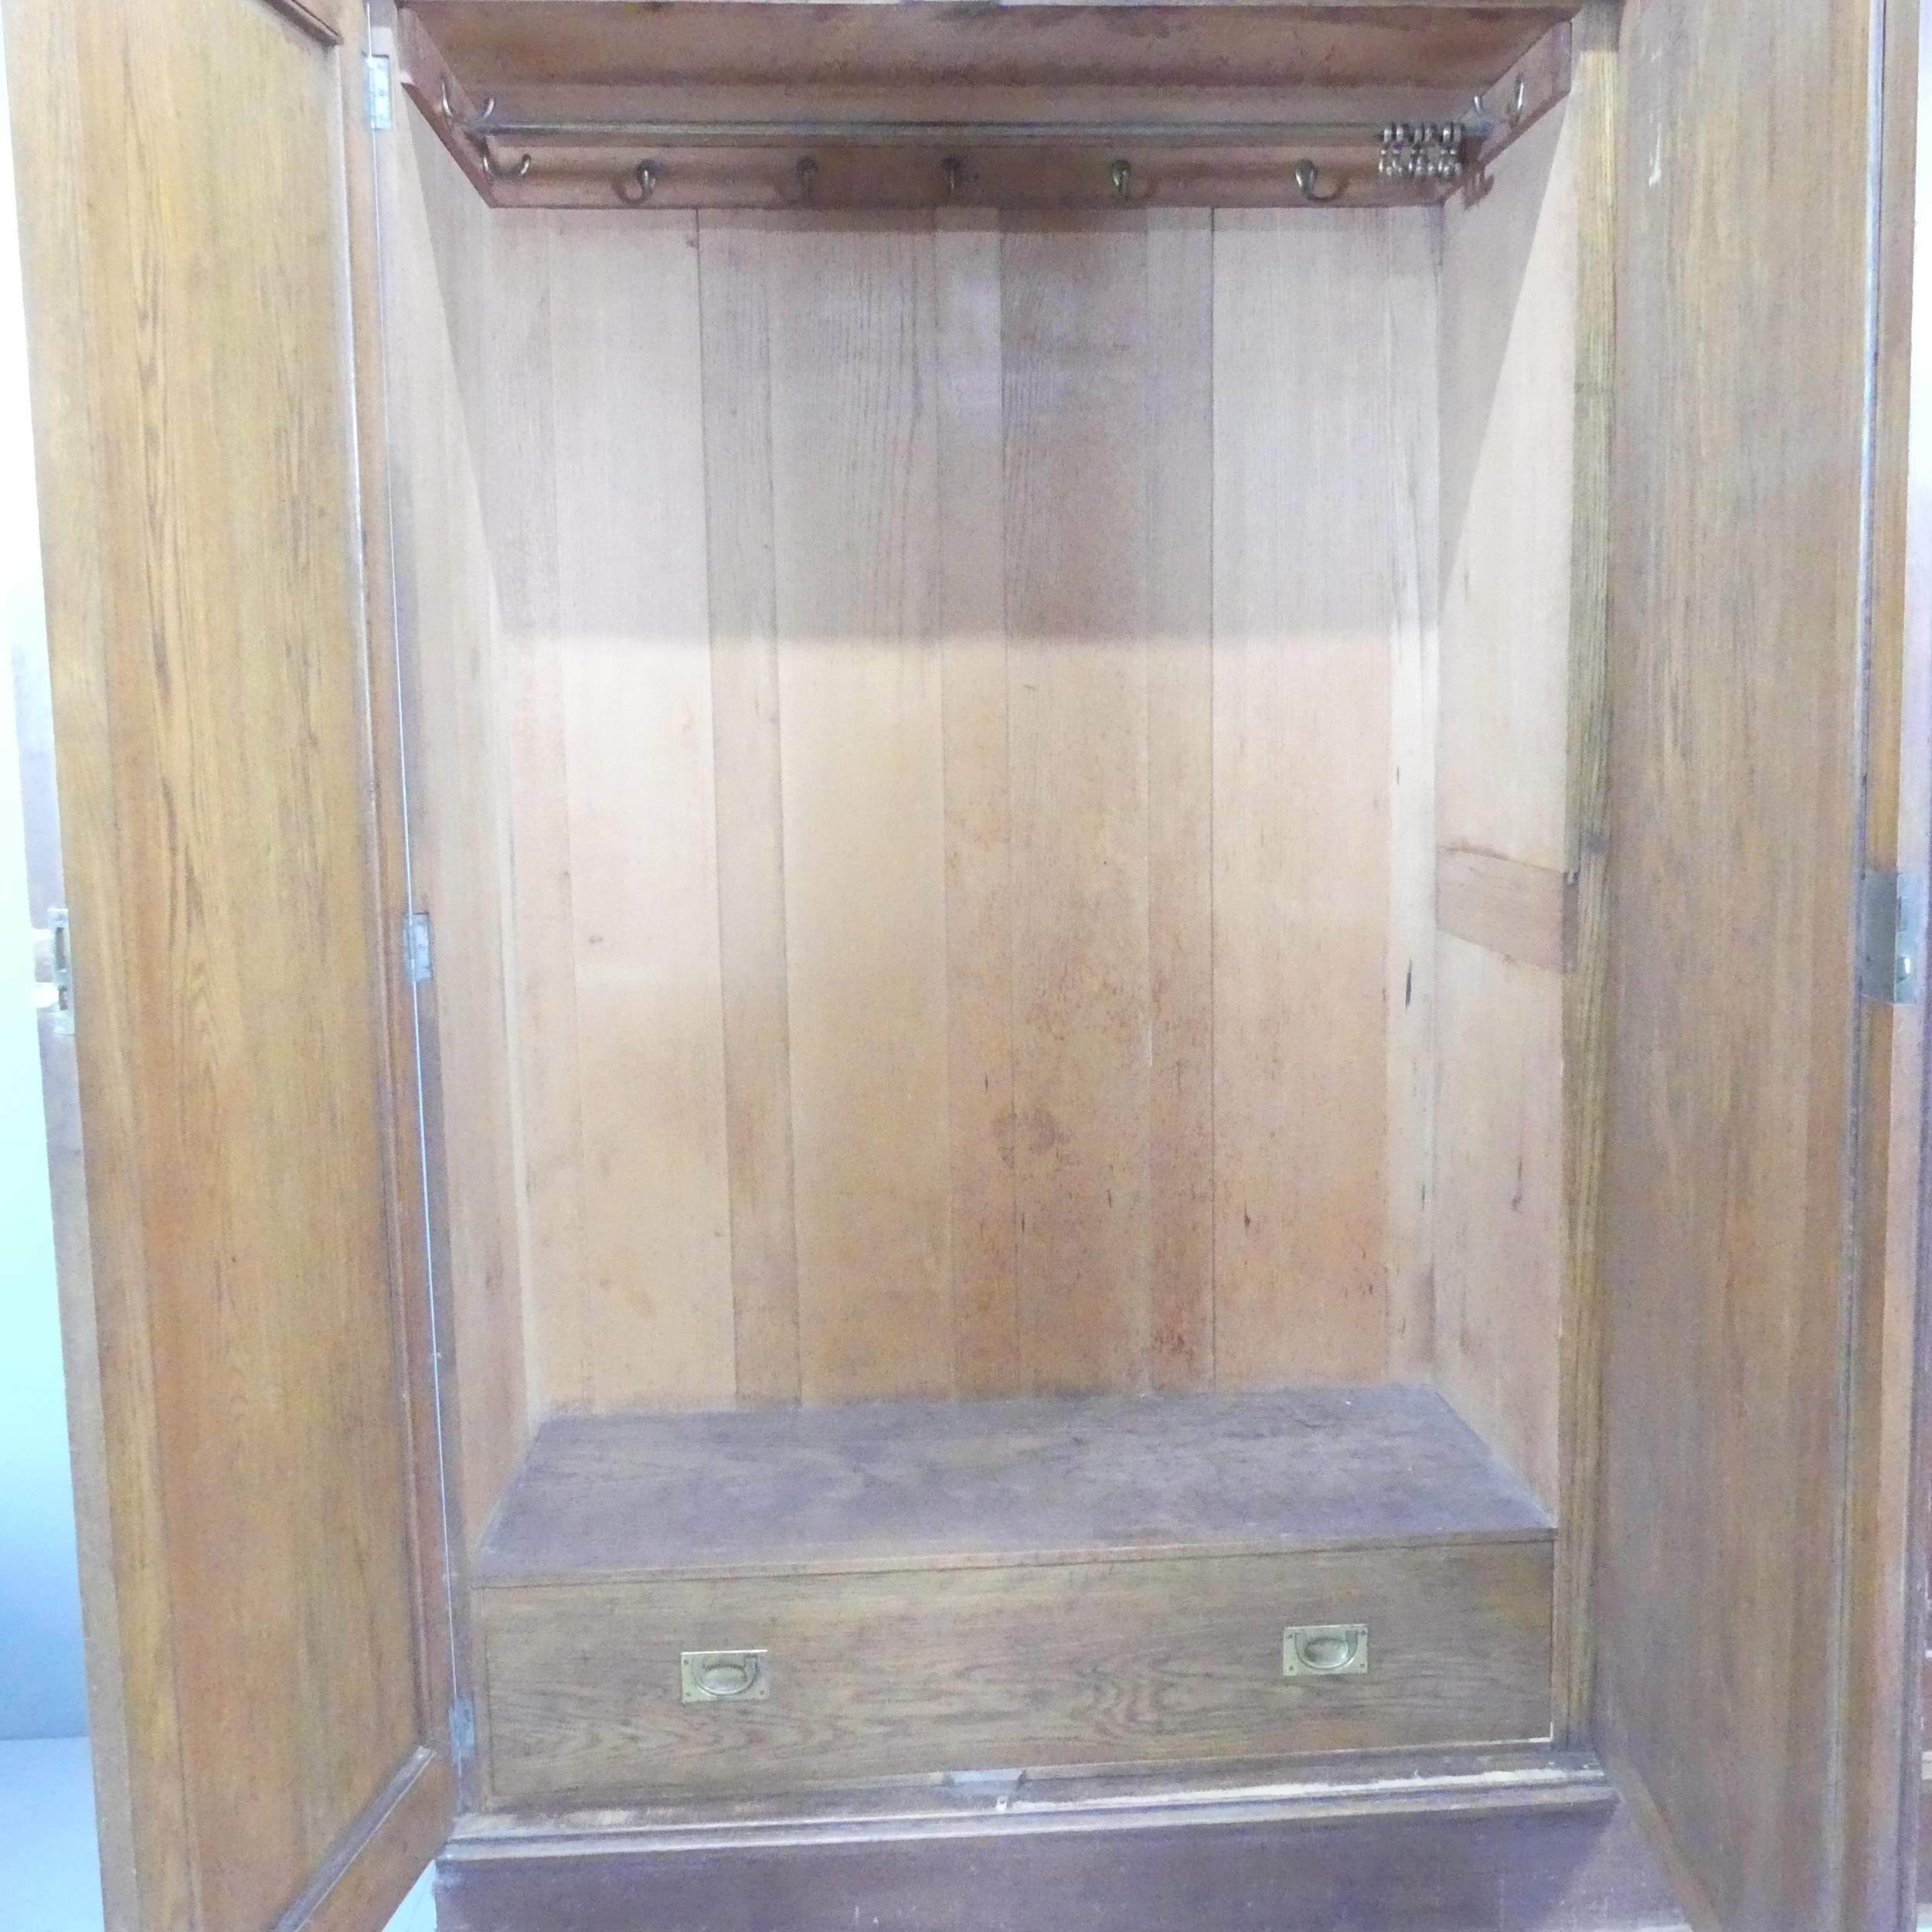 WYLIE AND LOCHHEAD - An Arts and Crafts oak triple wardrobe, possibly designed by John Ednie, with - Image 3 of 4